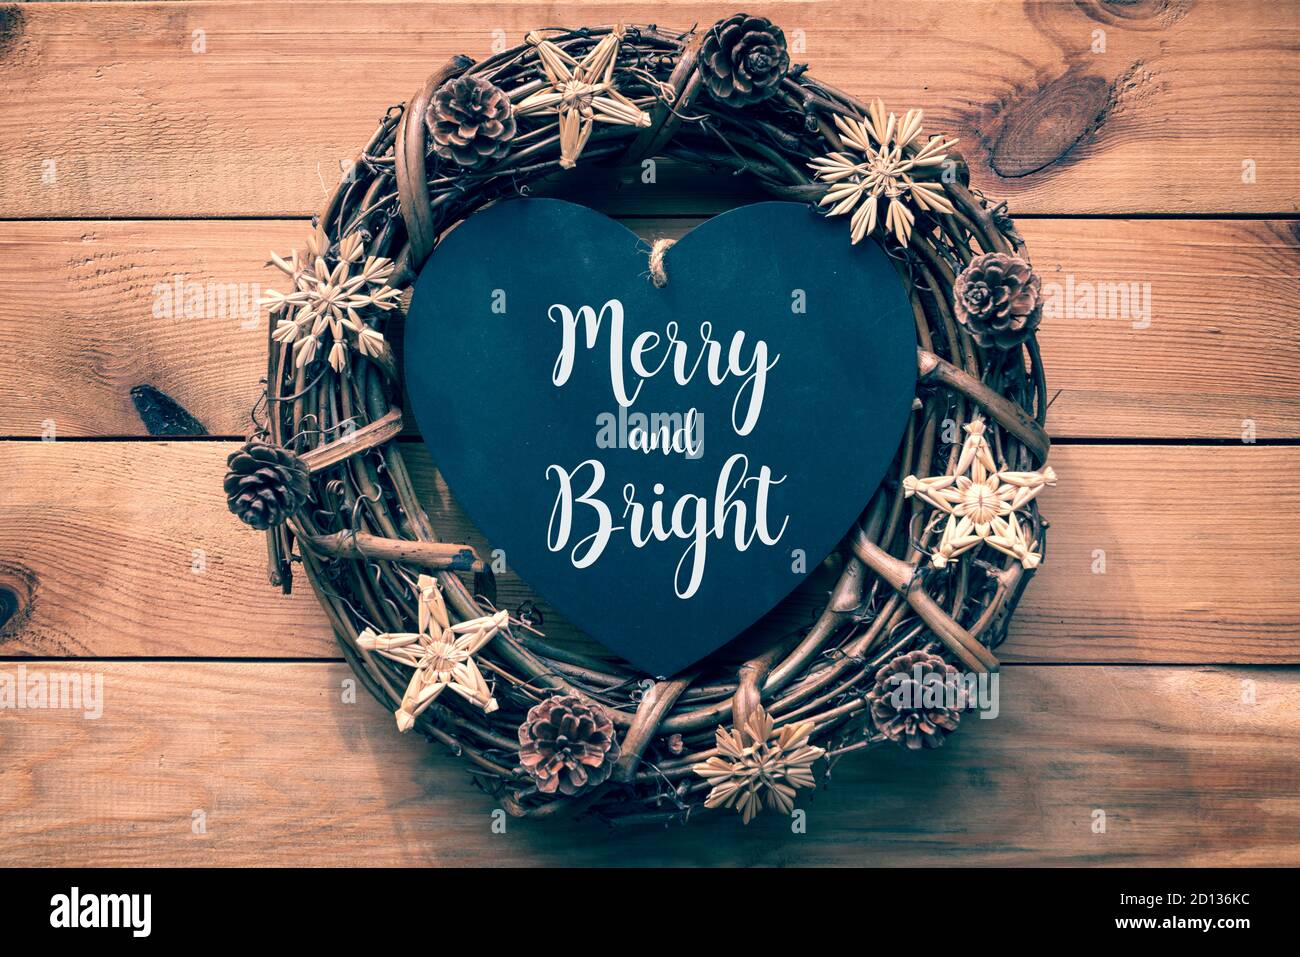 Merry and Bright Christmas greeting card. Rustic Christmas wreath on wooden planks background Stock Photo